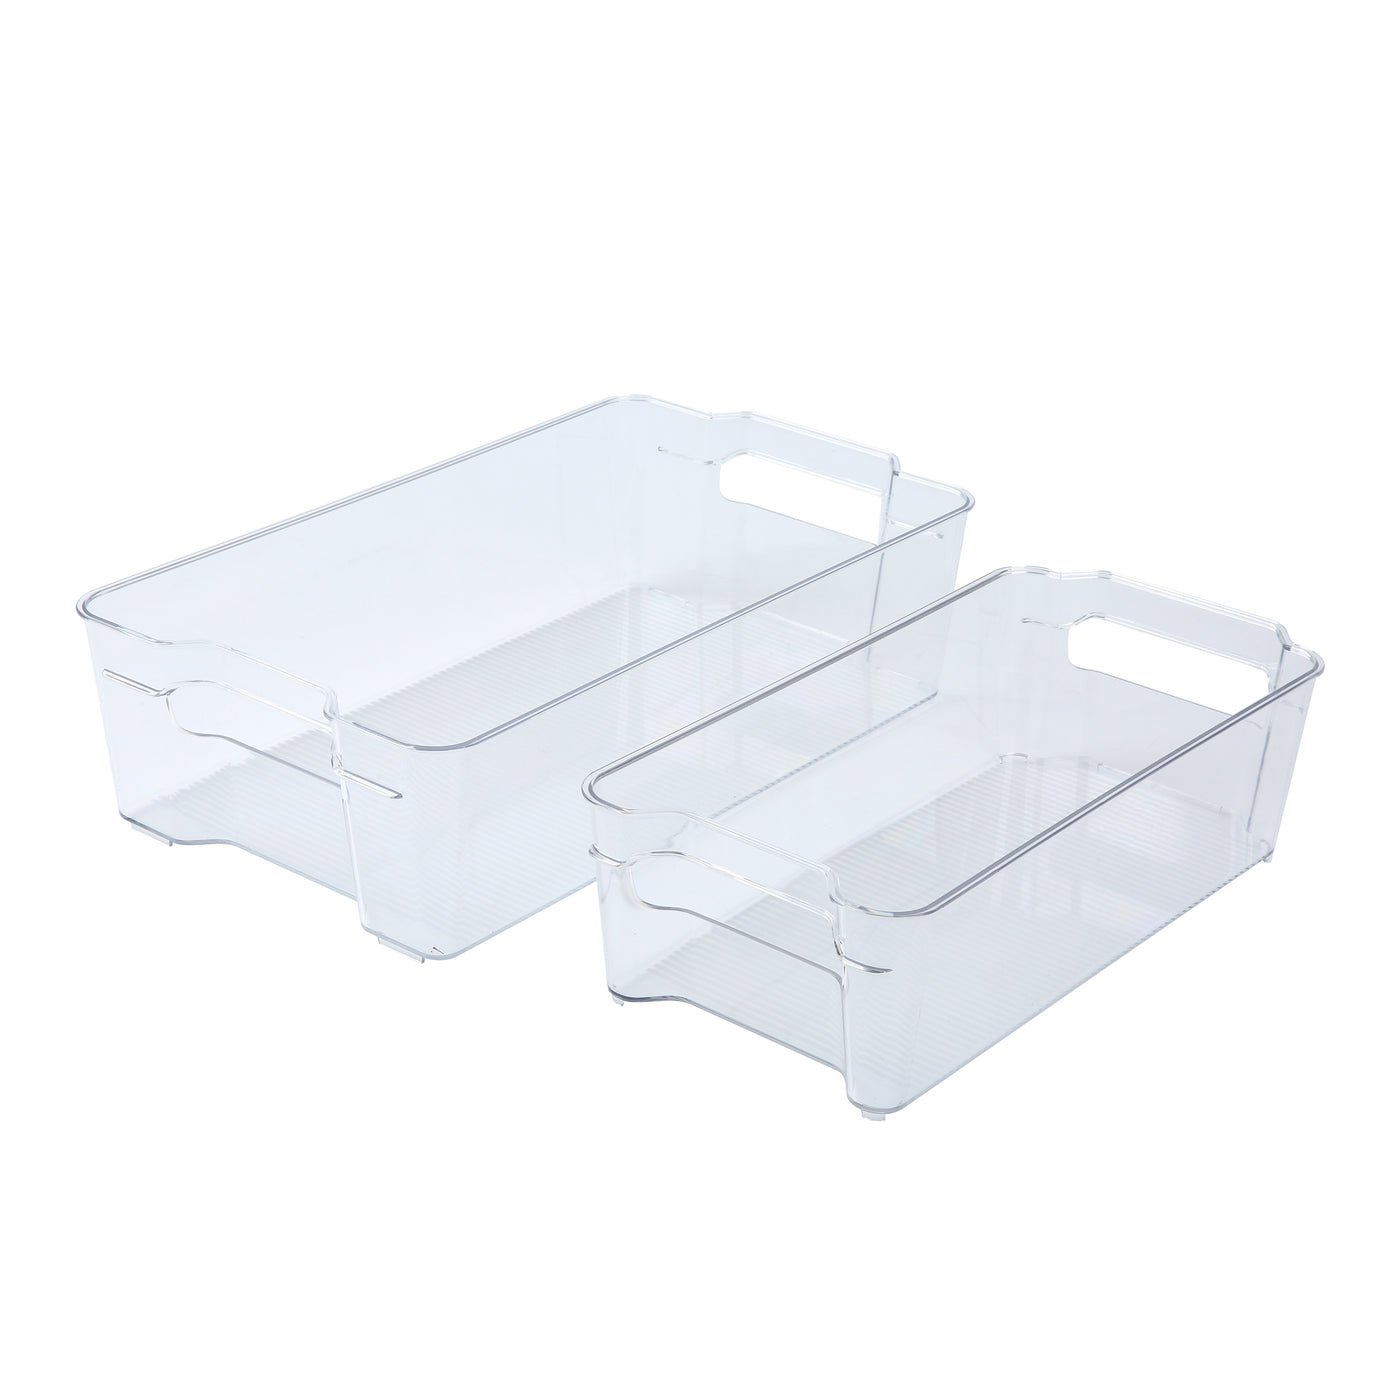 Set of 8 Home Pantry Organizer Bins - 4 Large and 4 Medium - Stackable Plastic Clear Food Storage Bin with Handles for Freezer